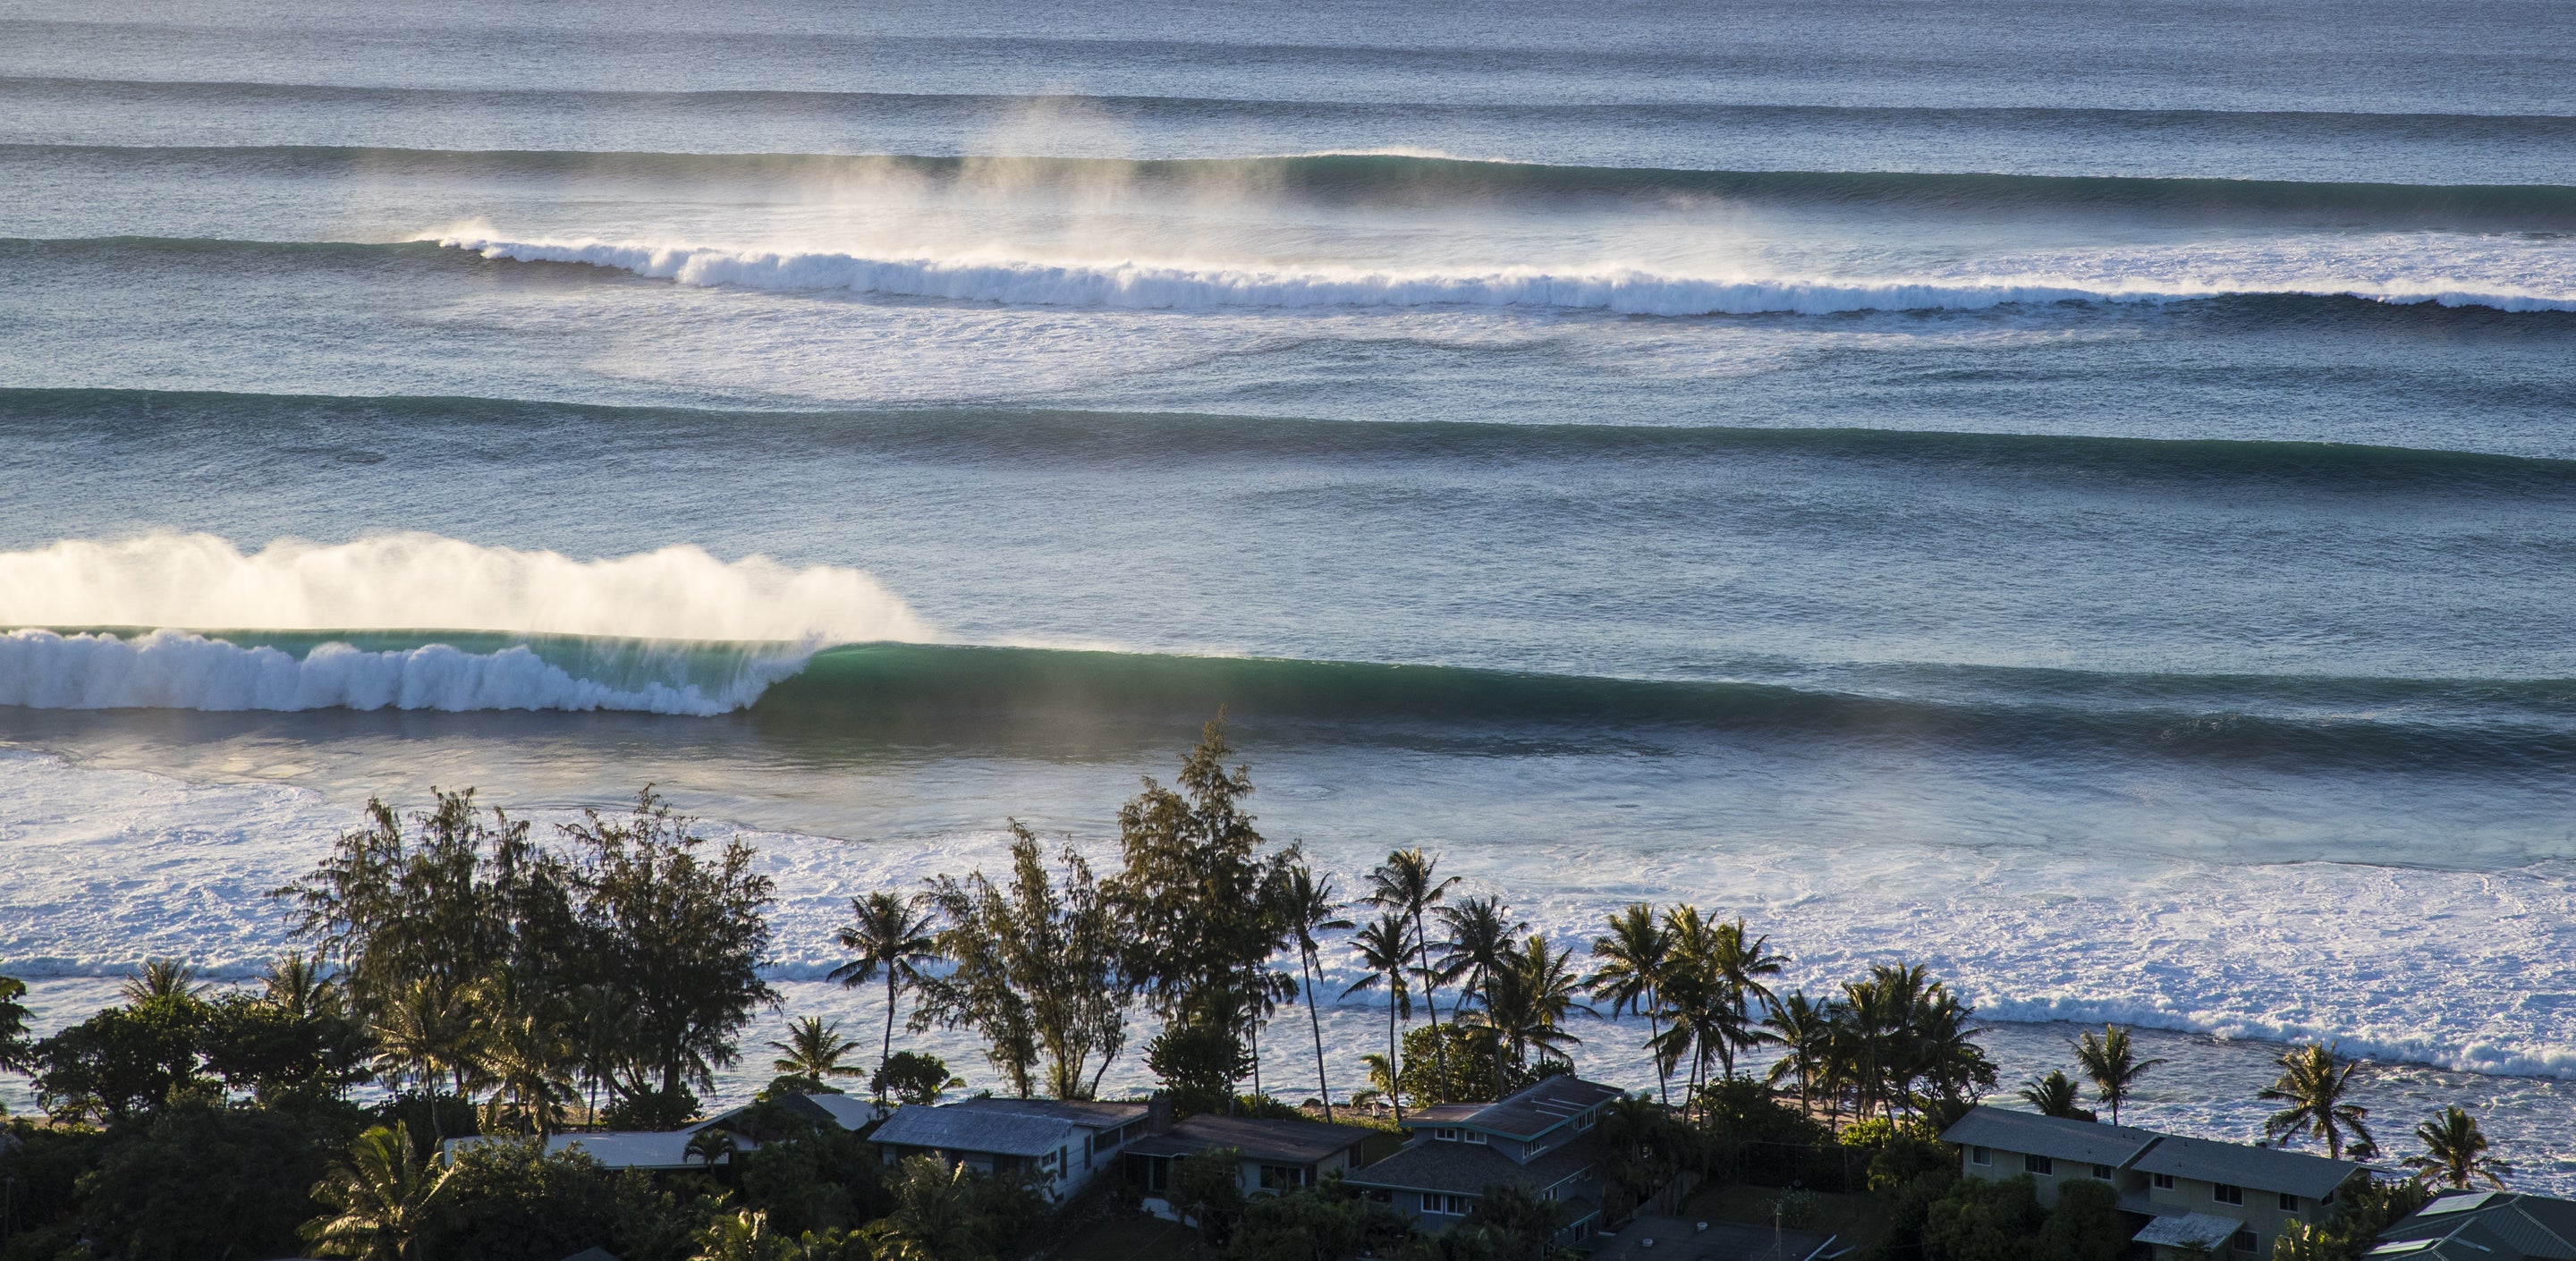 Swells on the horizon at Pipeline